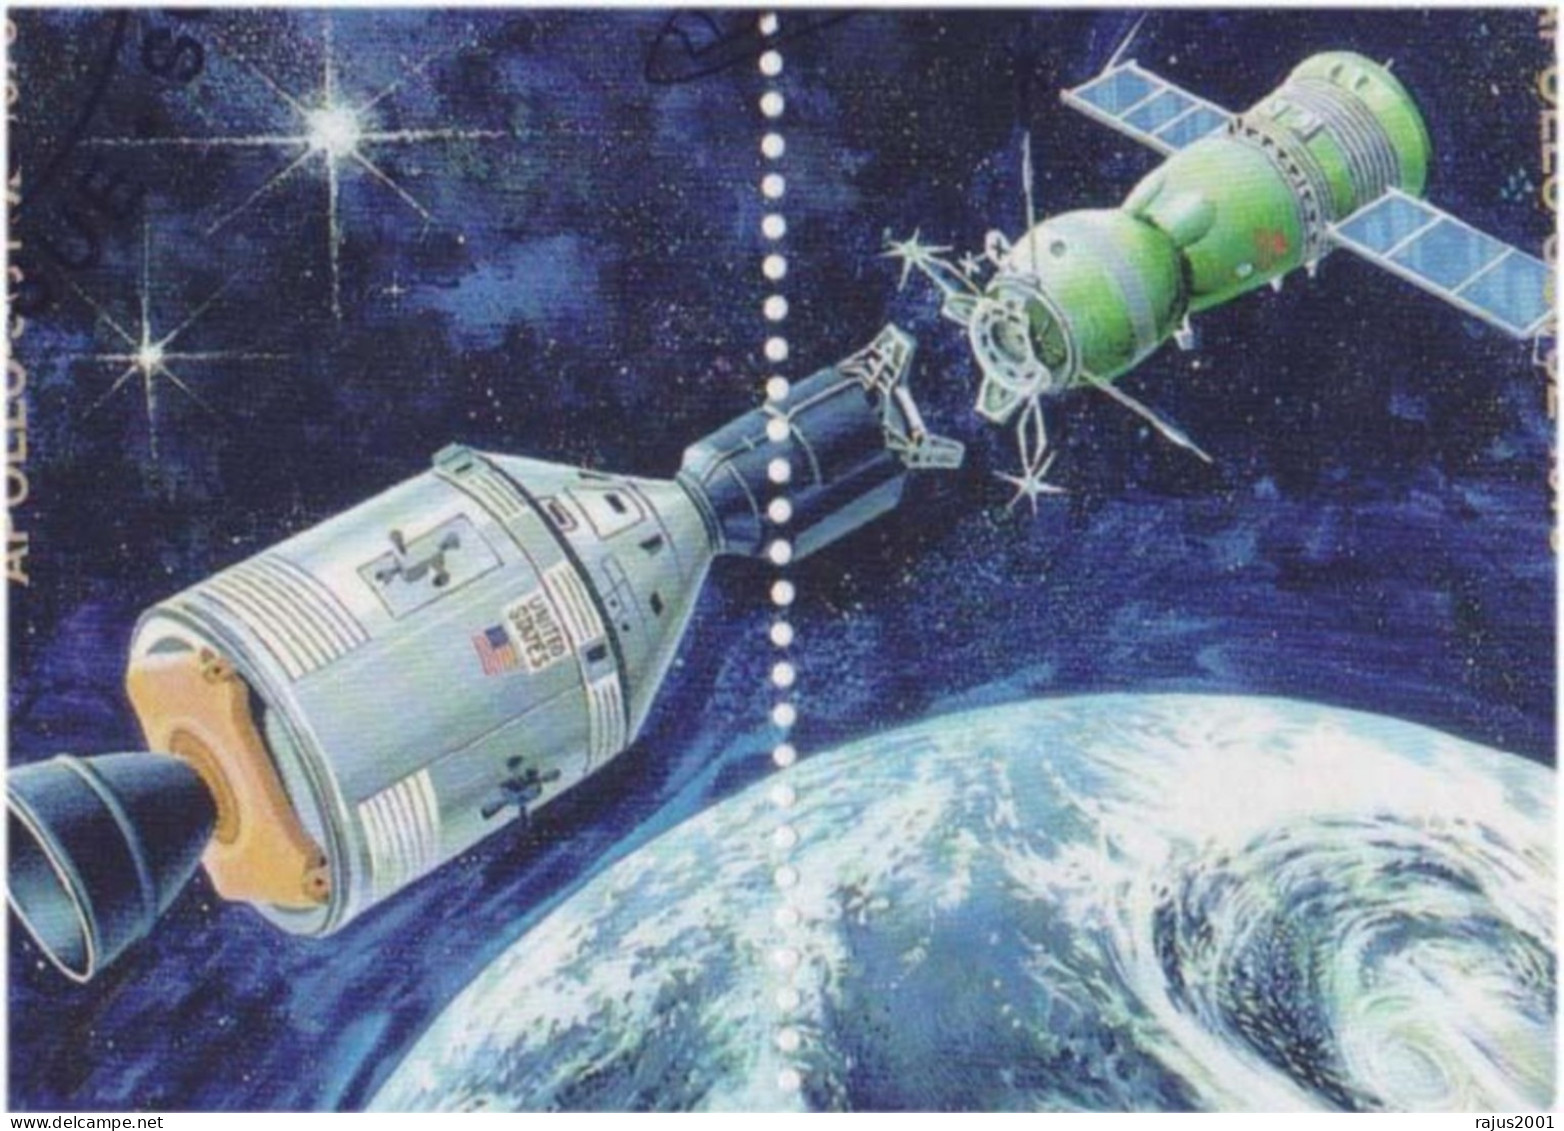 MIR Shuttle APOLLO-SOYUZ Link Up, First Joint Space Flight Between US And USSR, Earth, Planet, Astronomy, Marshall FDC - Astronomie